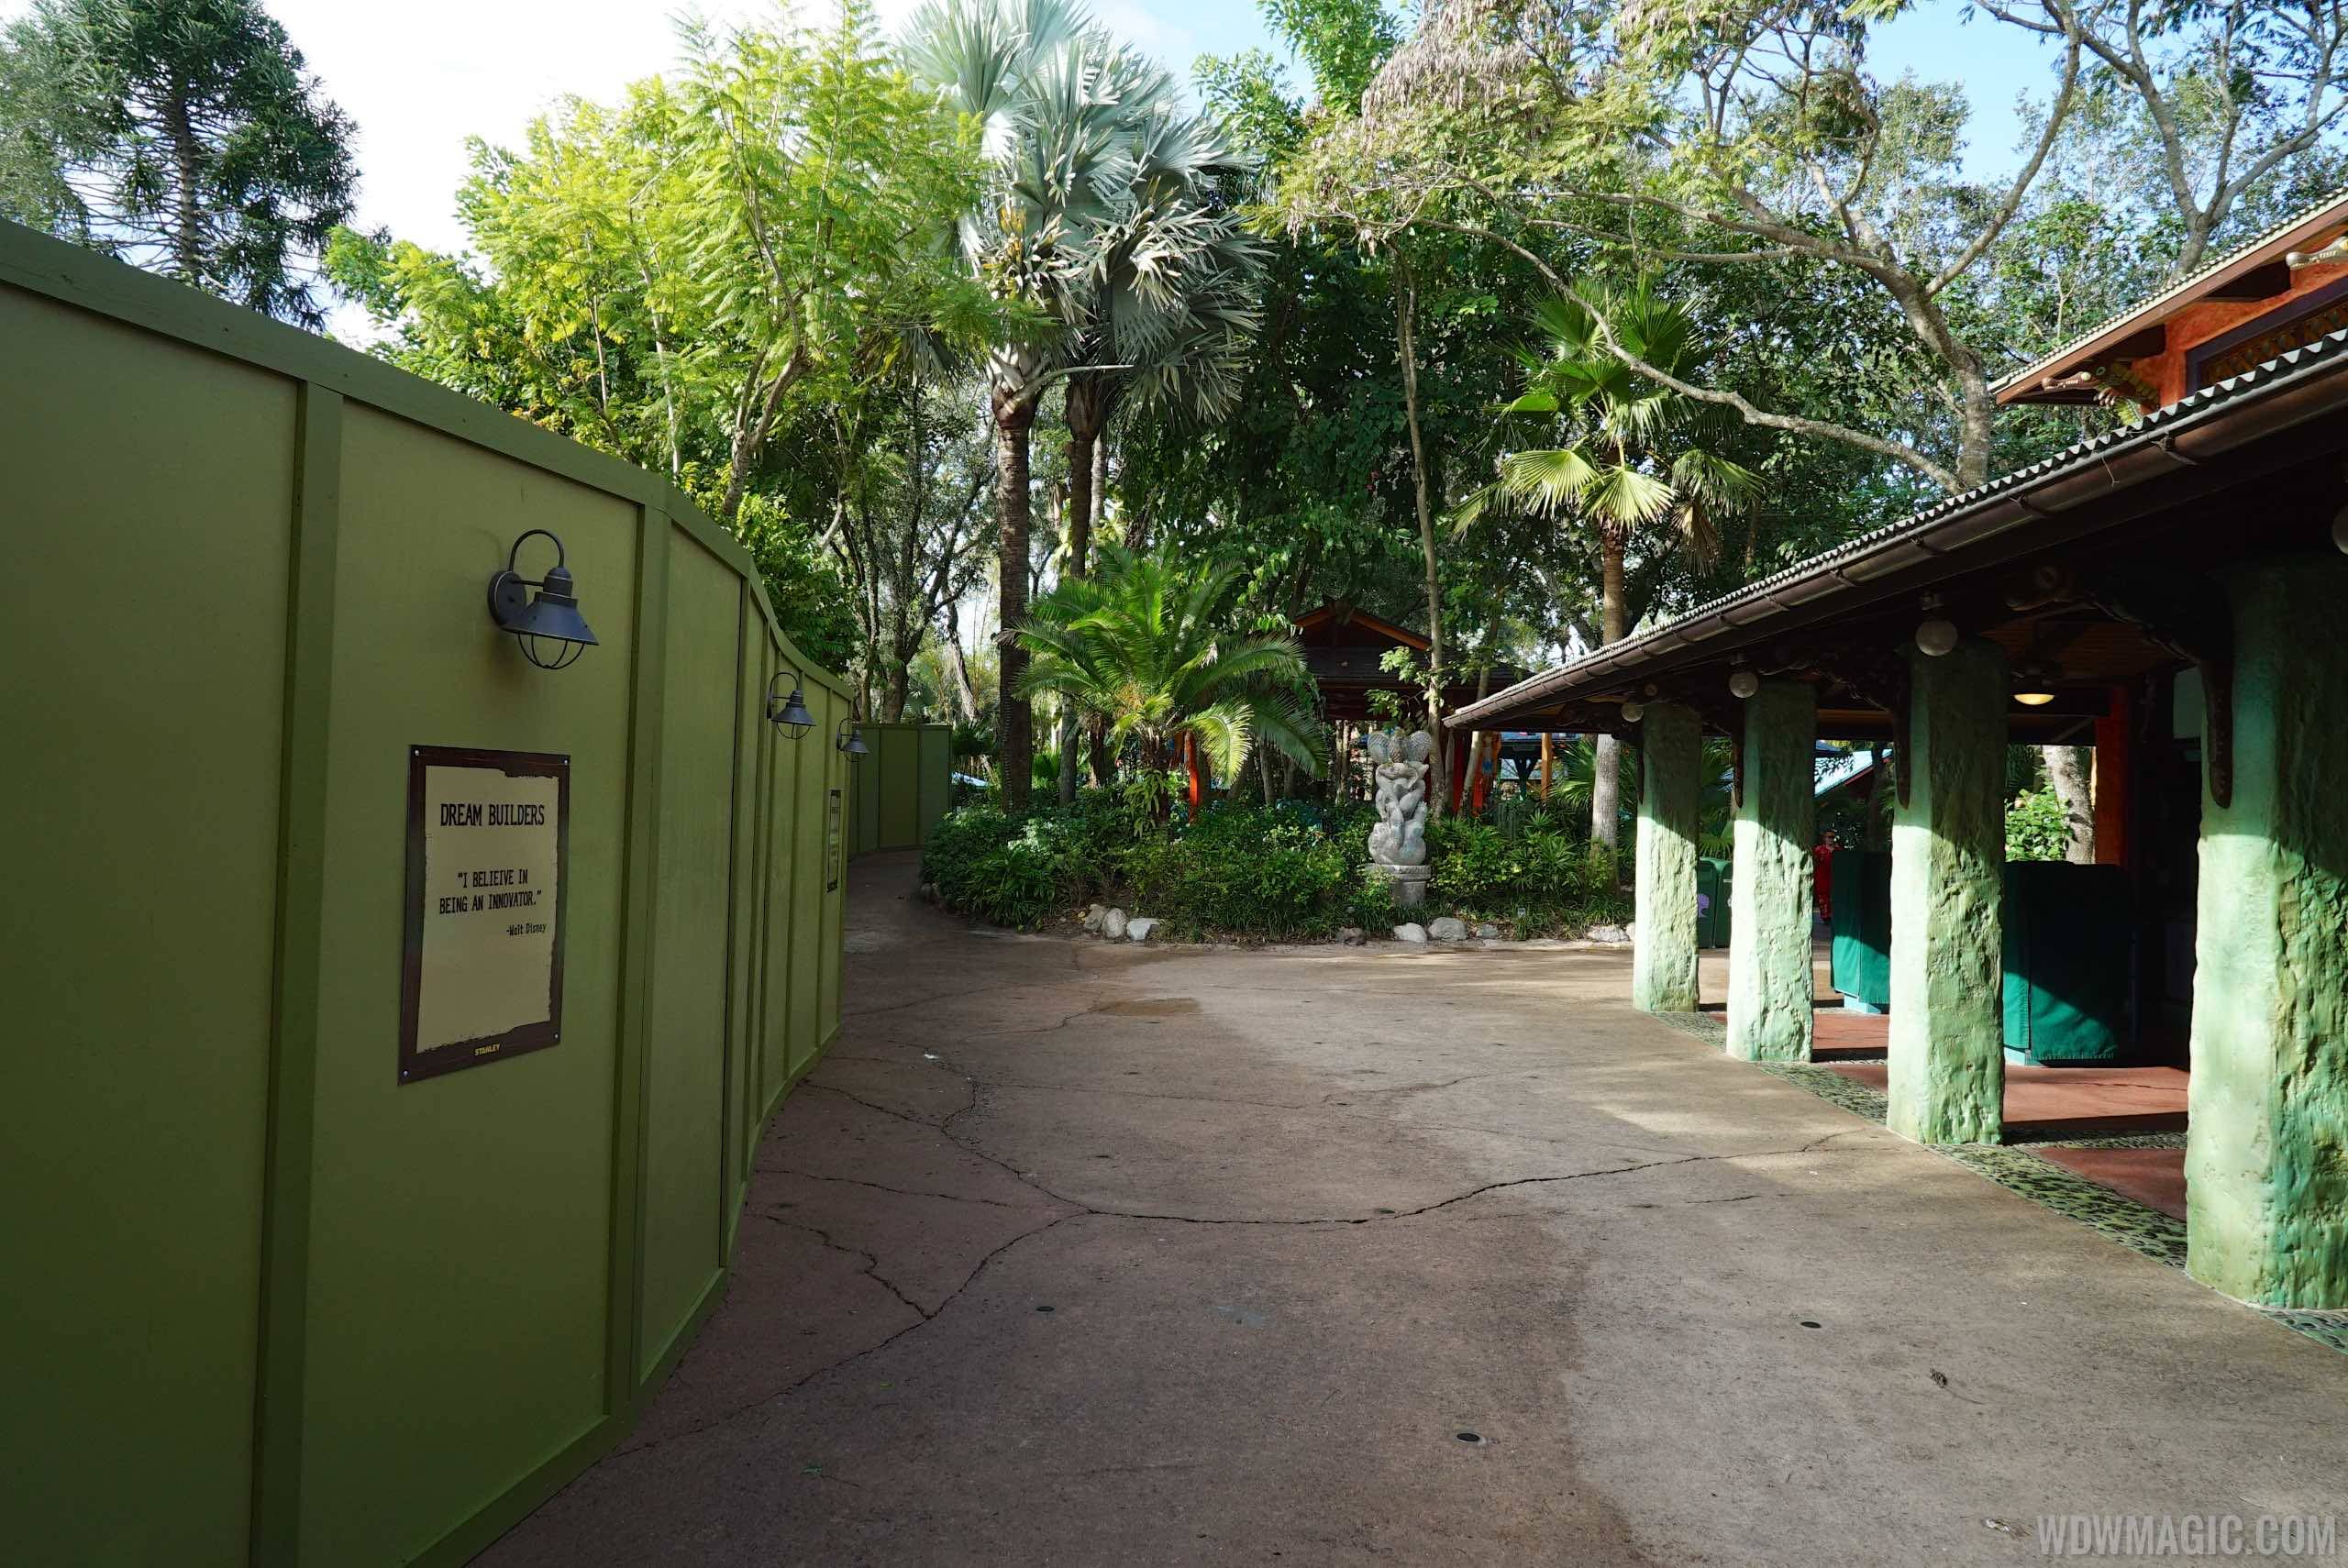 Discovery Island walkway expansion